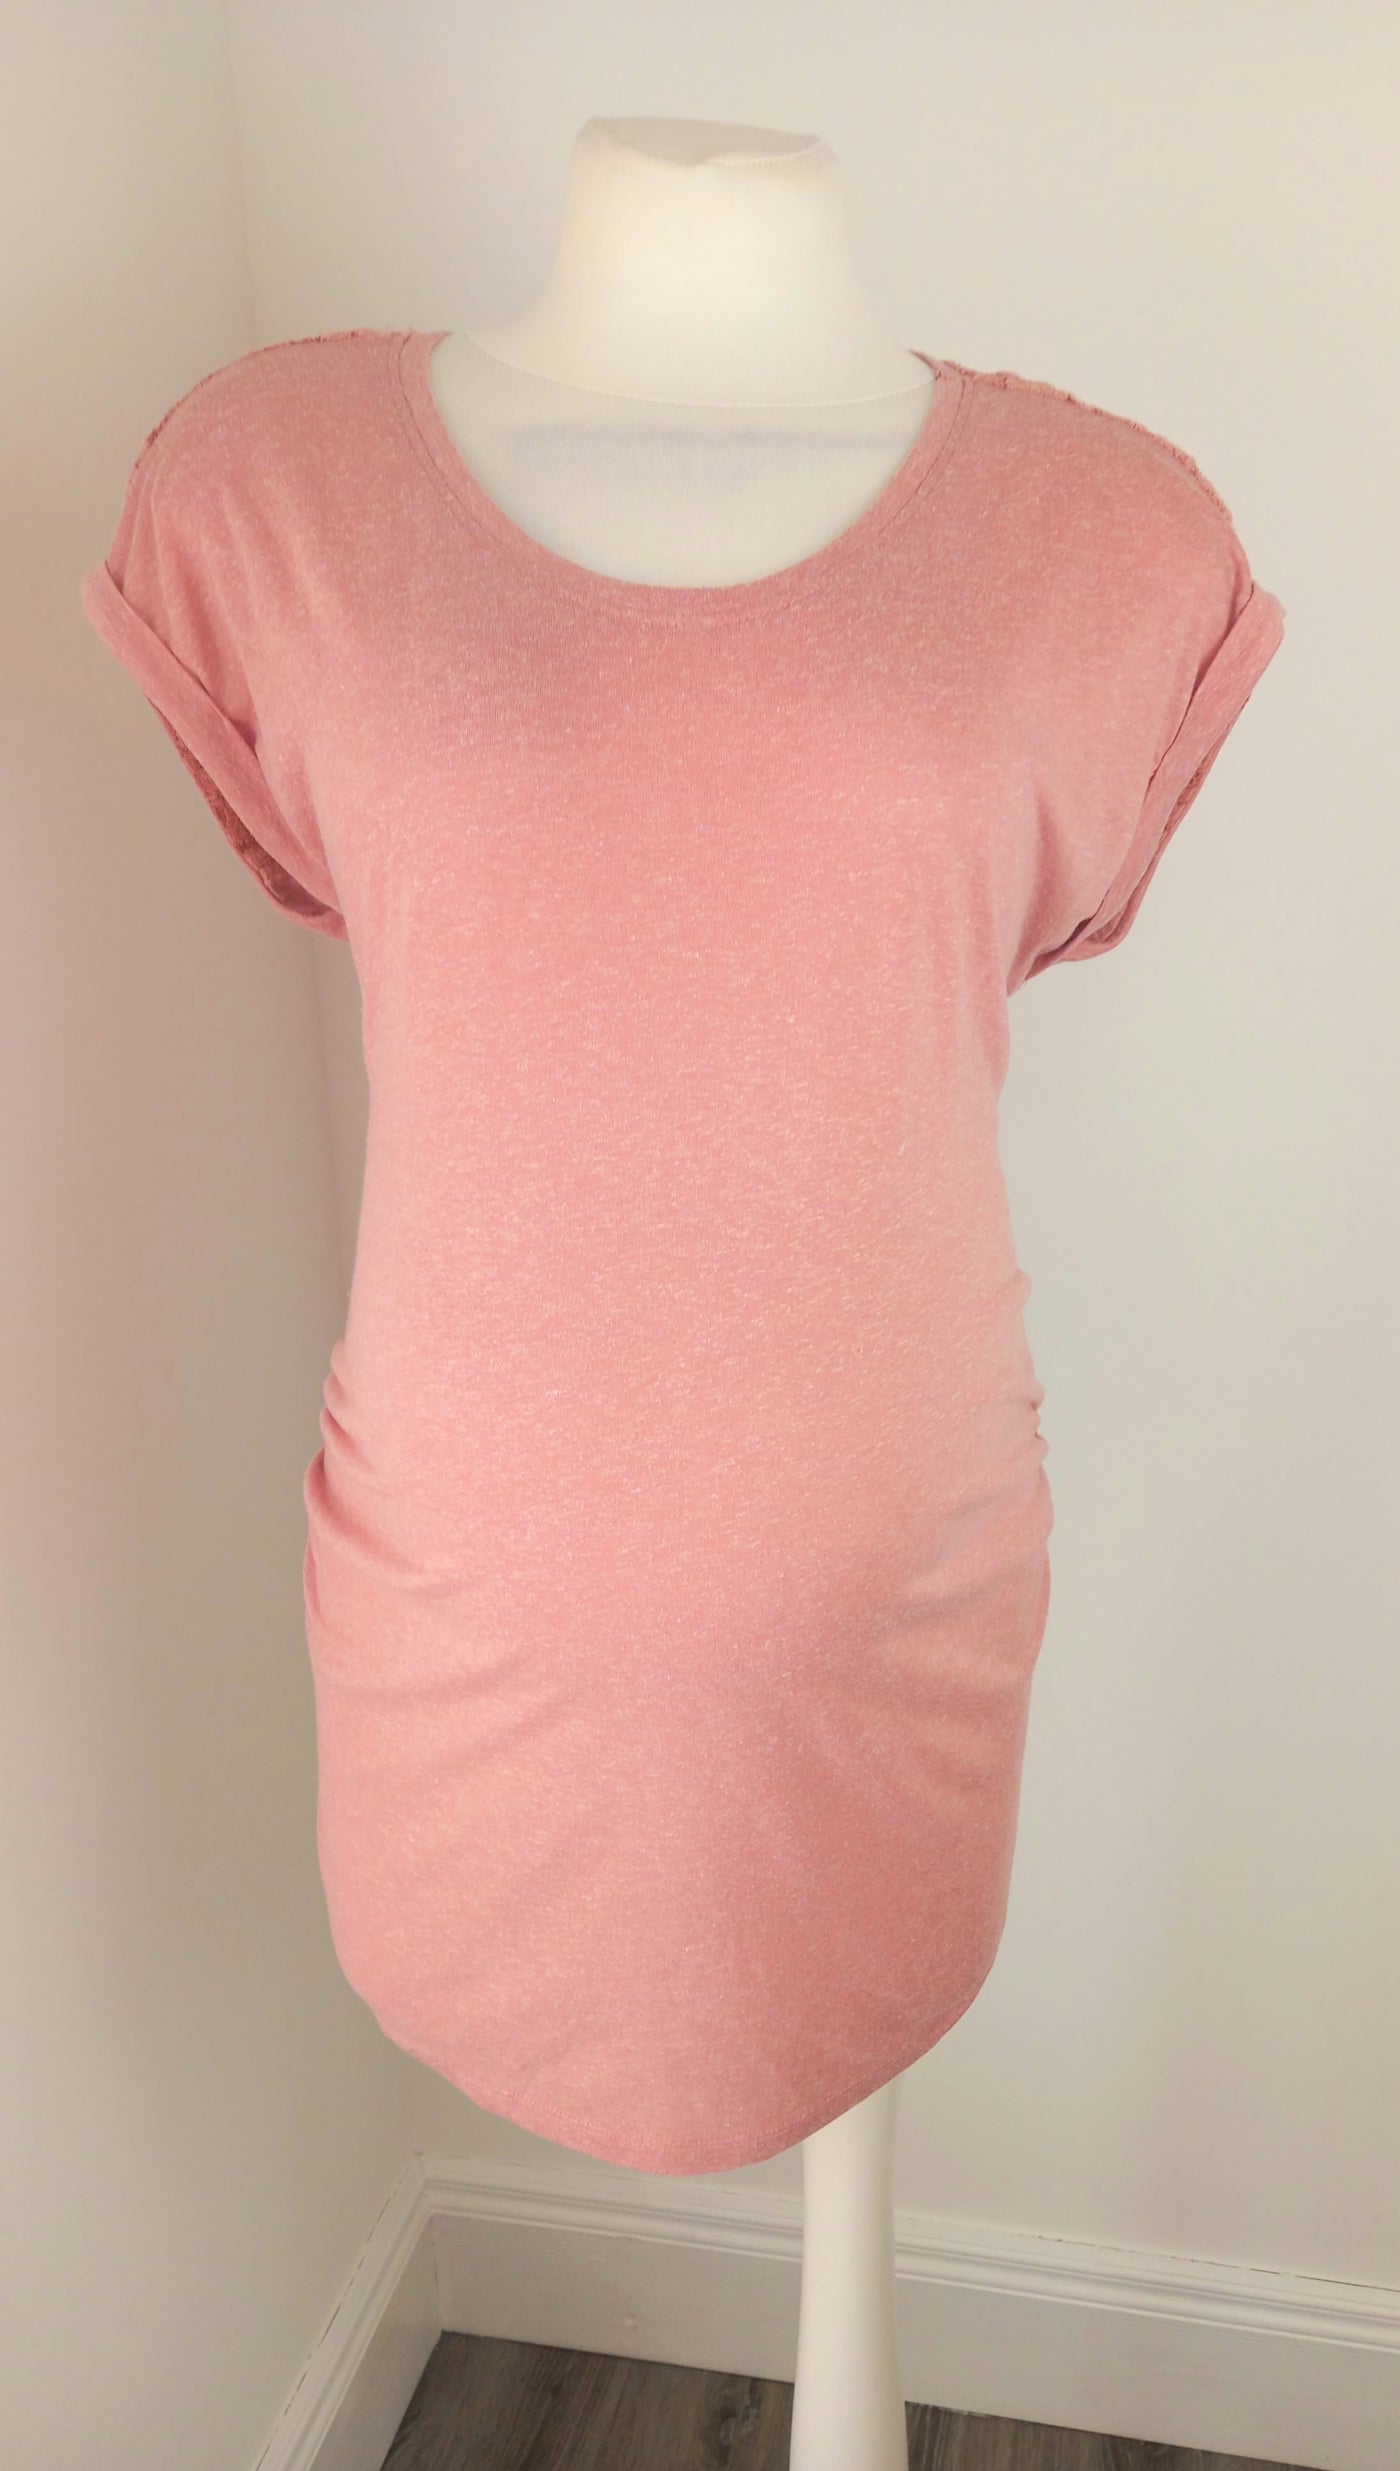 New Look Maternity blush pink cap sleeve top with lace back detail - Size 16